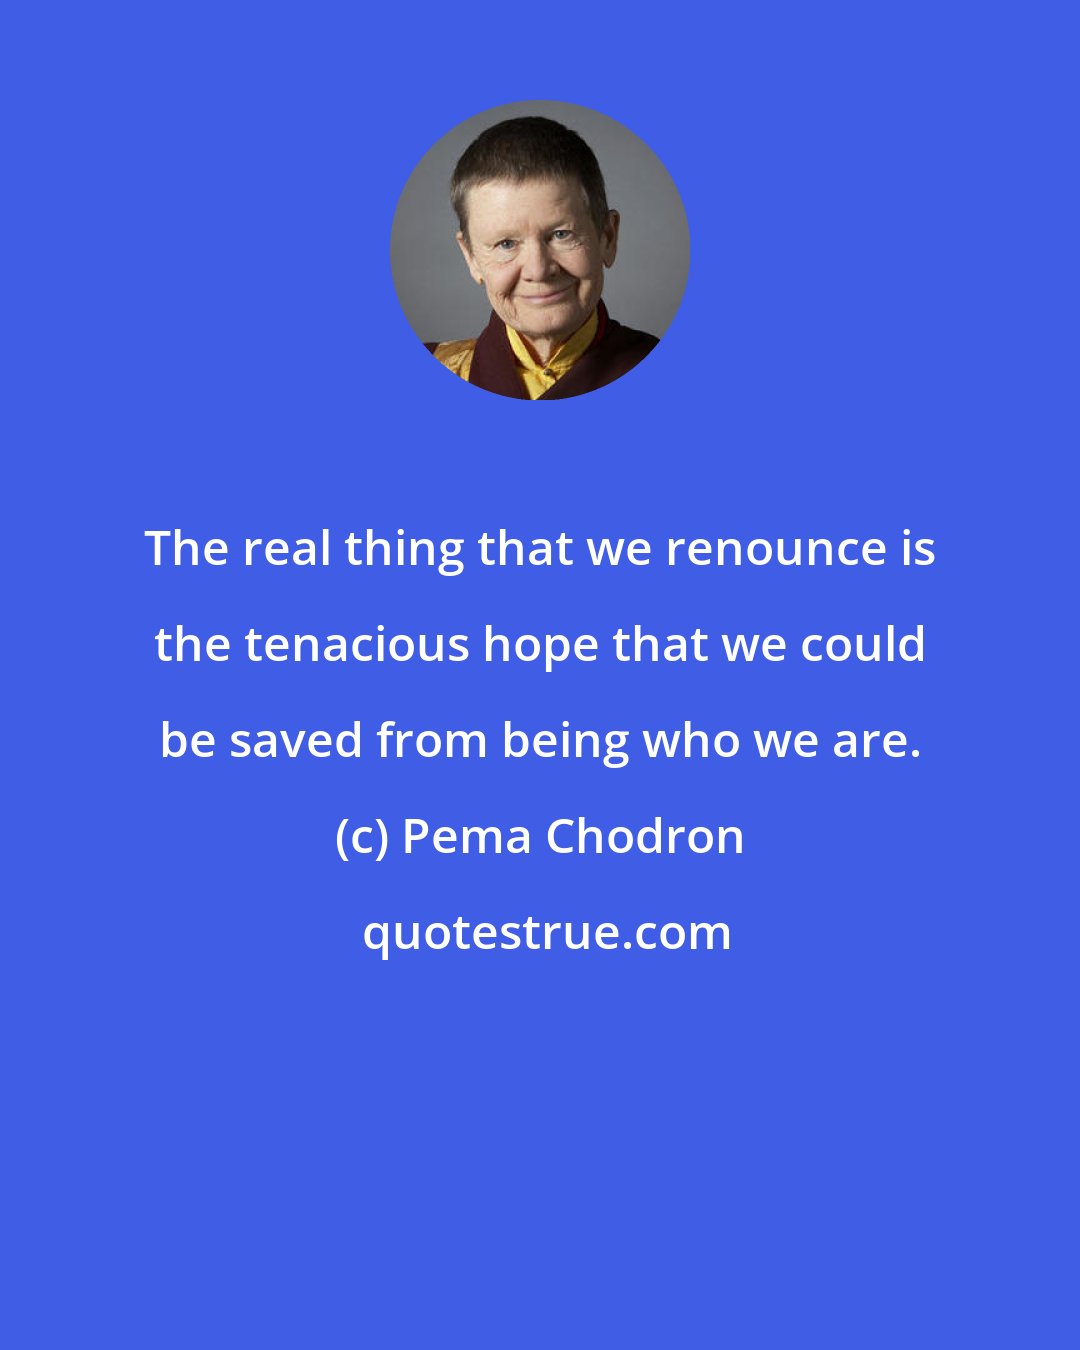 Pema Chodron: The real thing that we renounce is the tenacious hope that we could be saved from being who we are.